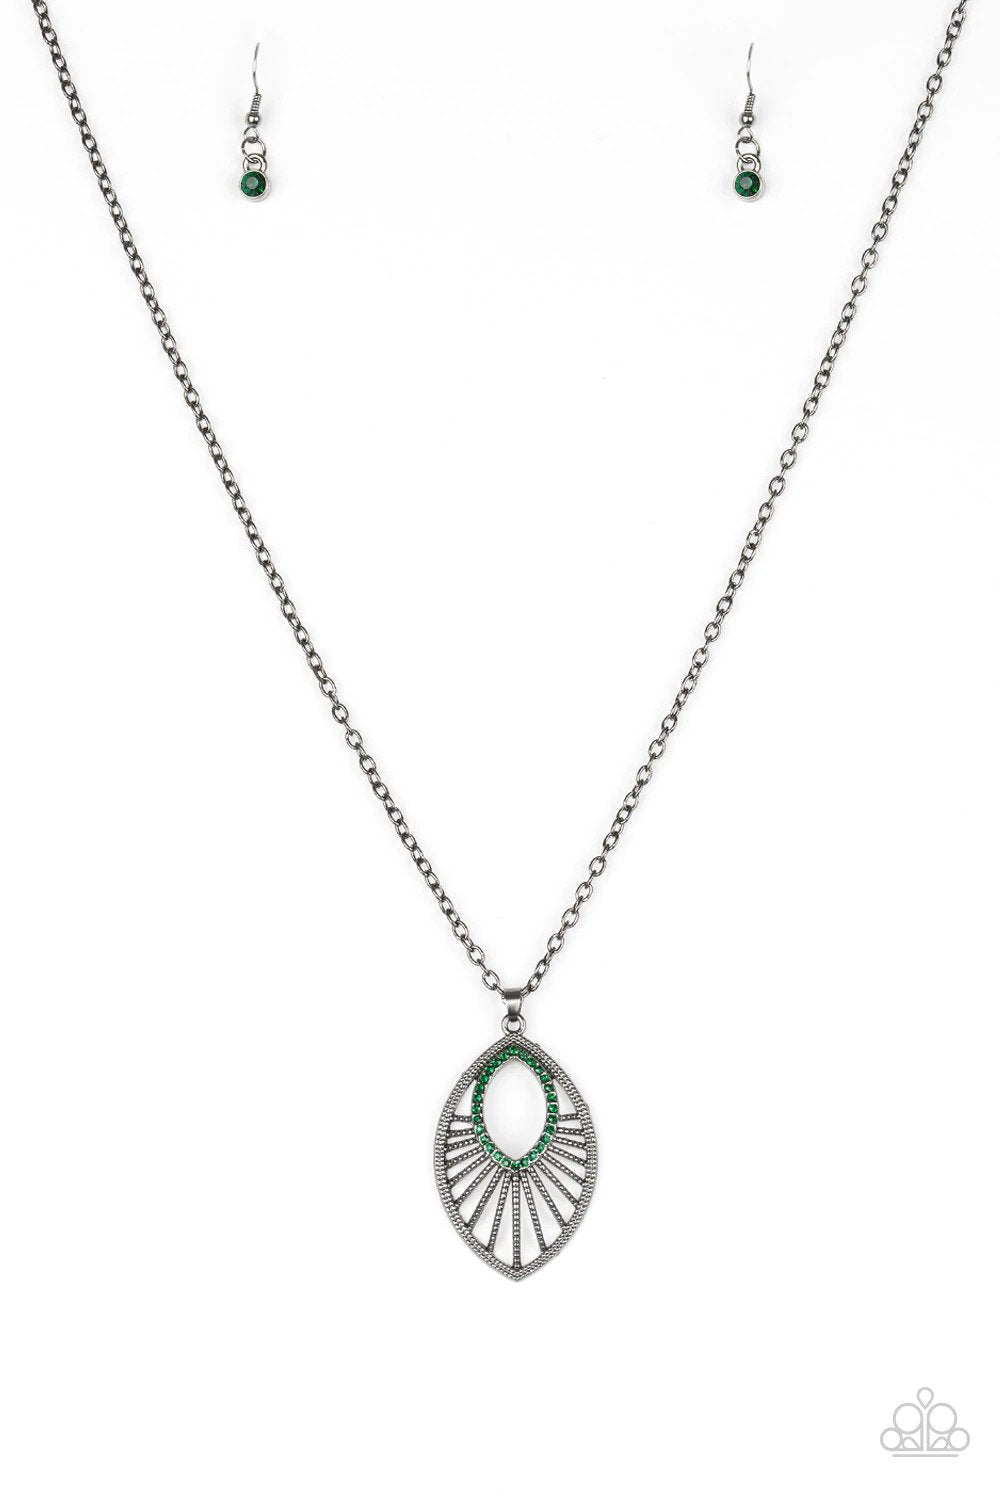 Court Couture Green Necklace - Paparazzi Accessories- lightbox - CarasShop.com - $5 Jewelry by Cara Jewels